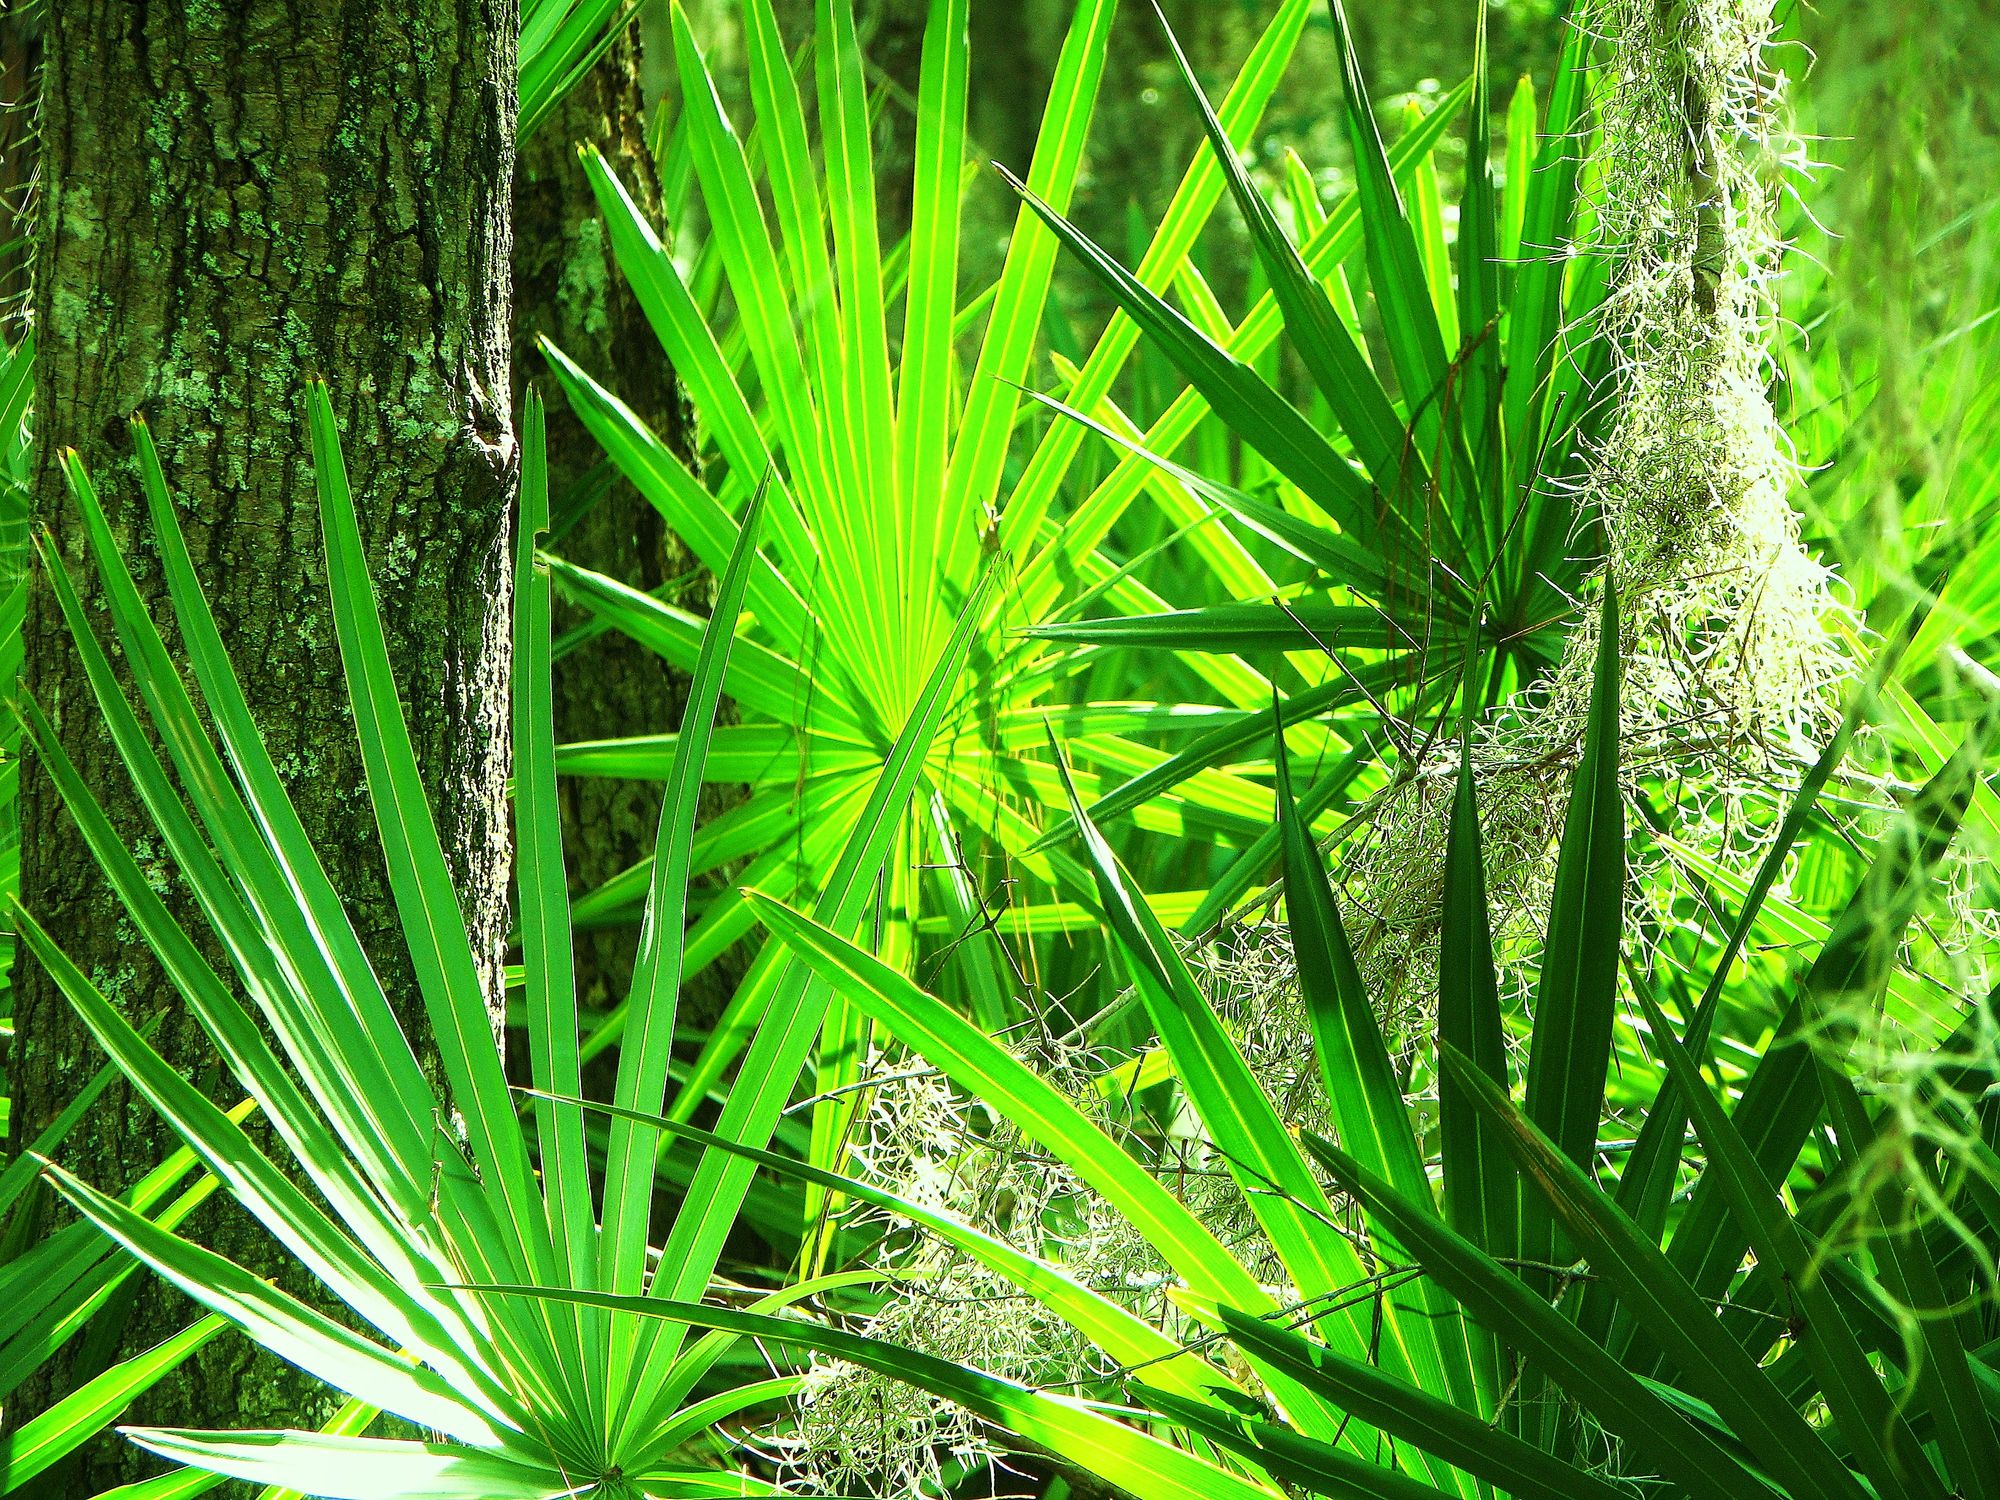 Saw Palmetto in a Forest Setting by Forest Farming, Flickr